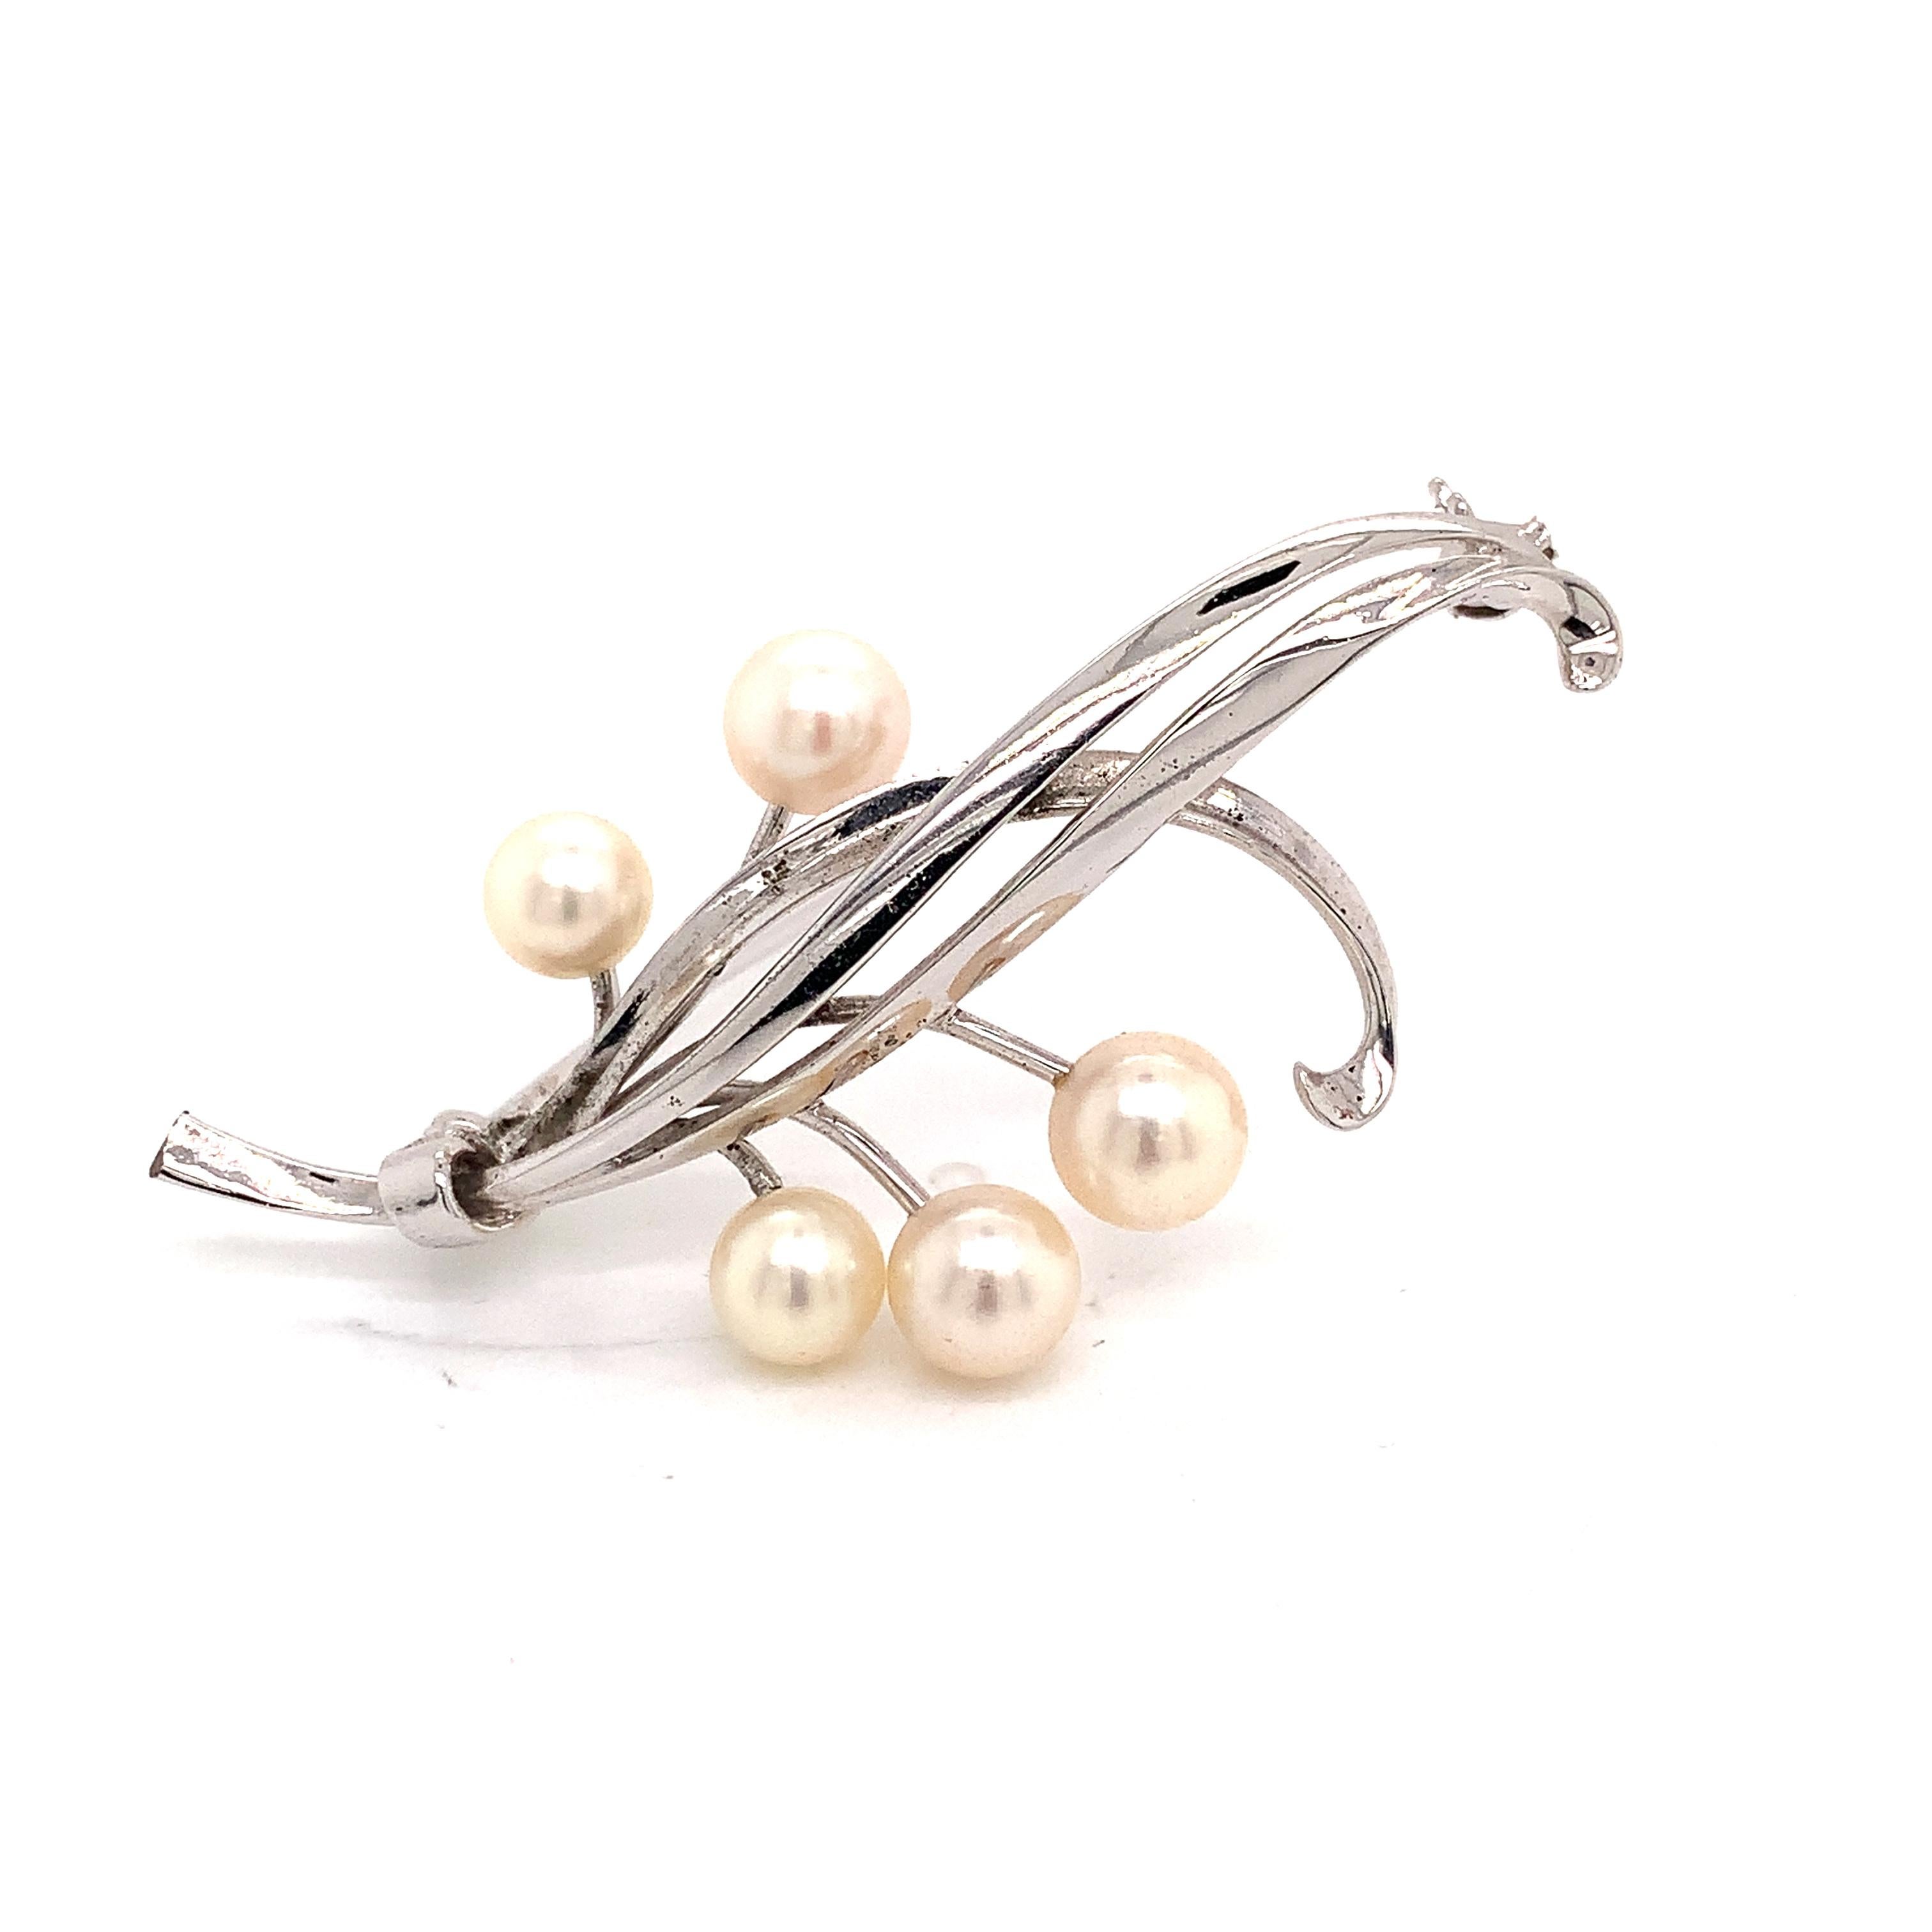 Mikimoto Estate Akoya Pearl Brooch Pin Sterling Silver 5.43 Gr For Sale 4